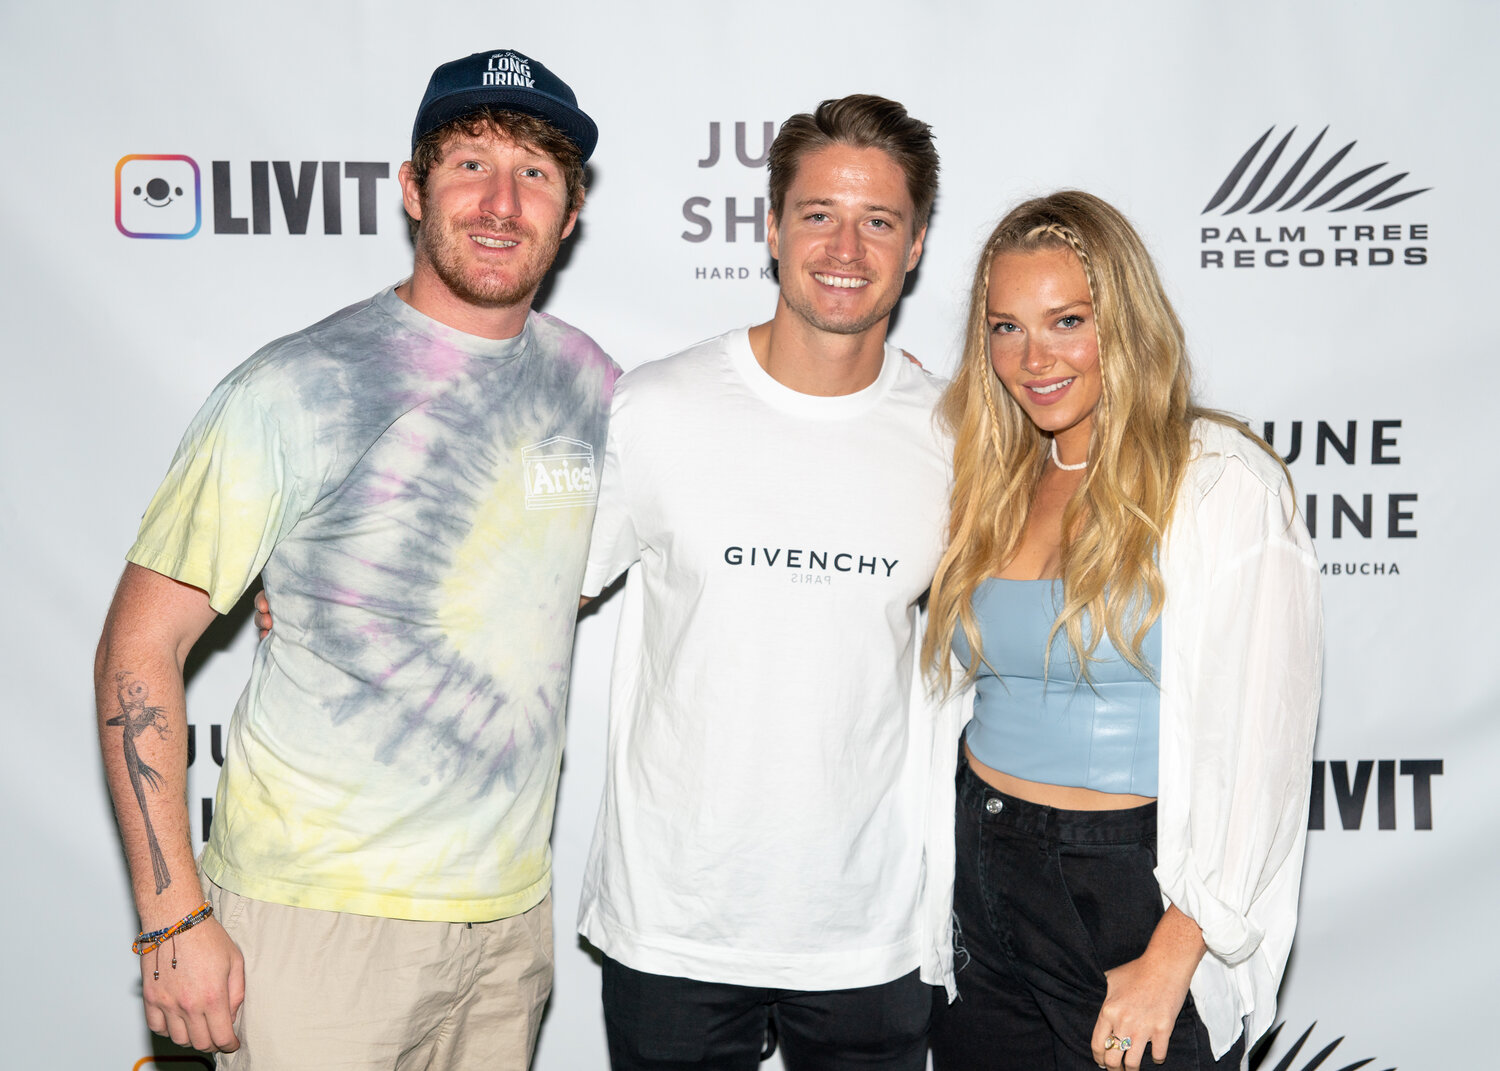 Manager Myles Shear, Superstar Kygo, Model Camille Kostek at the first-ever Palm Tree Records label showcase at CreatetheLab in Los Angeles presented by 17LIVE.